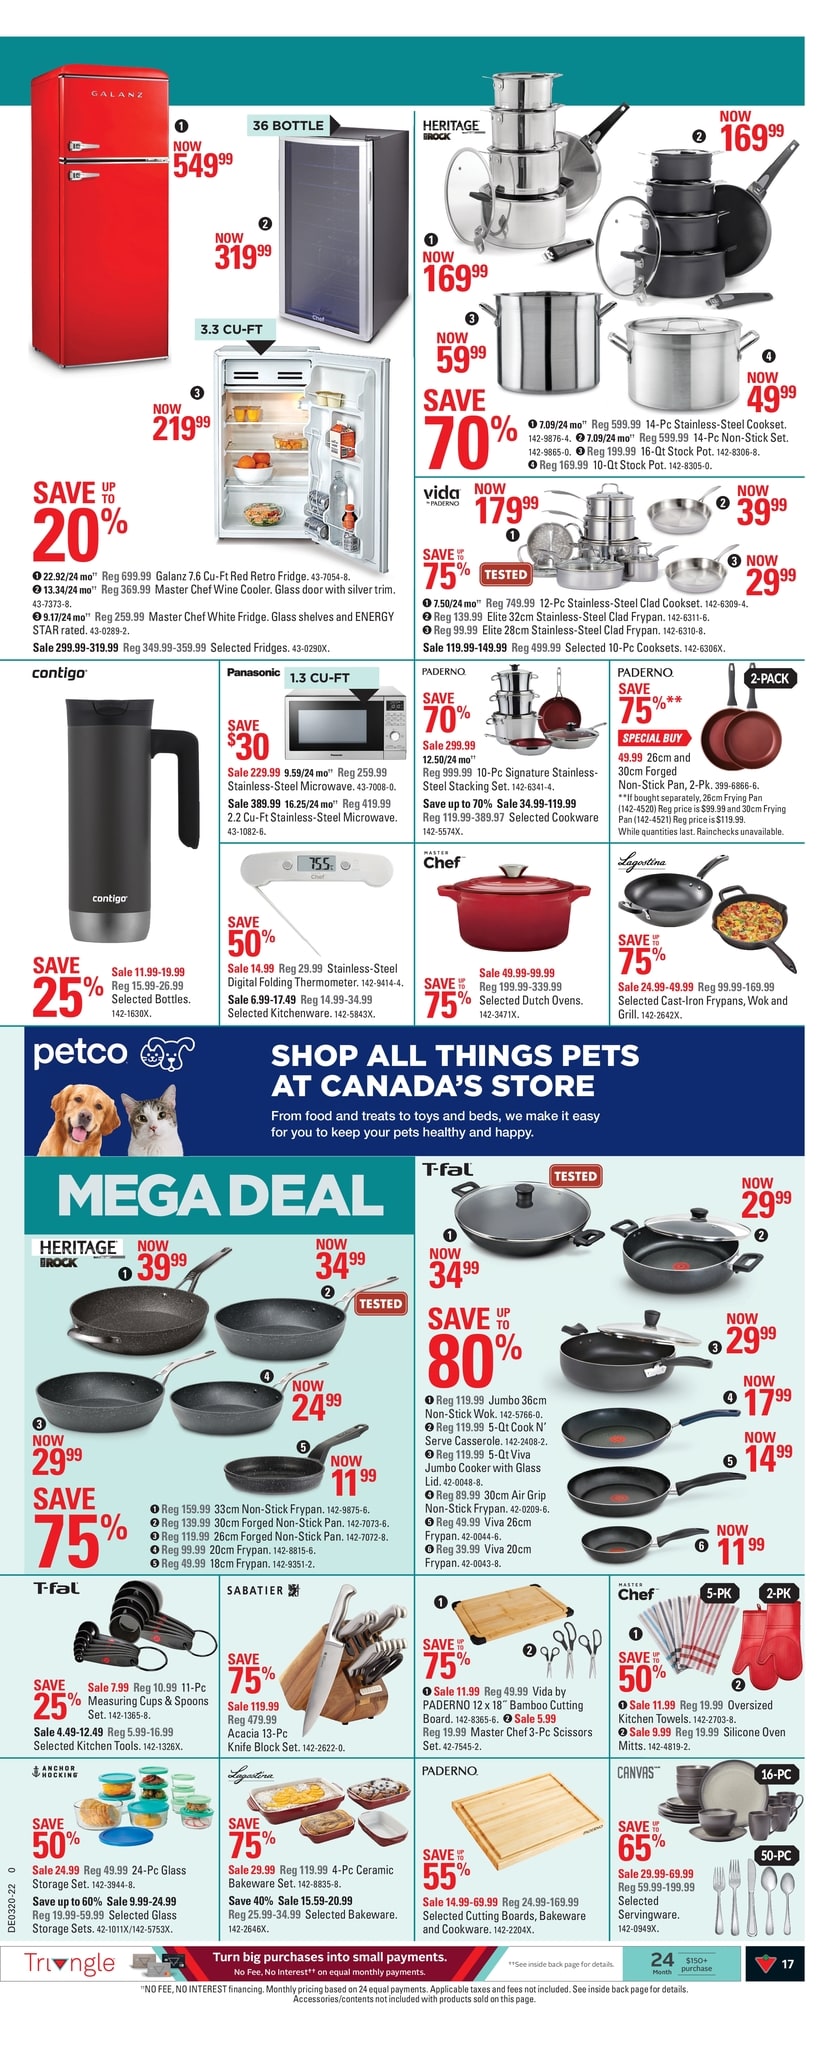 Canadian Tire - Weekly Flyer Specials - Page 17